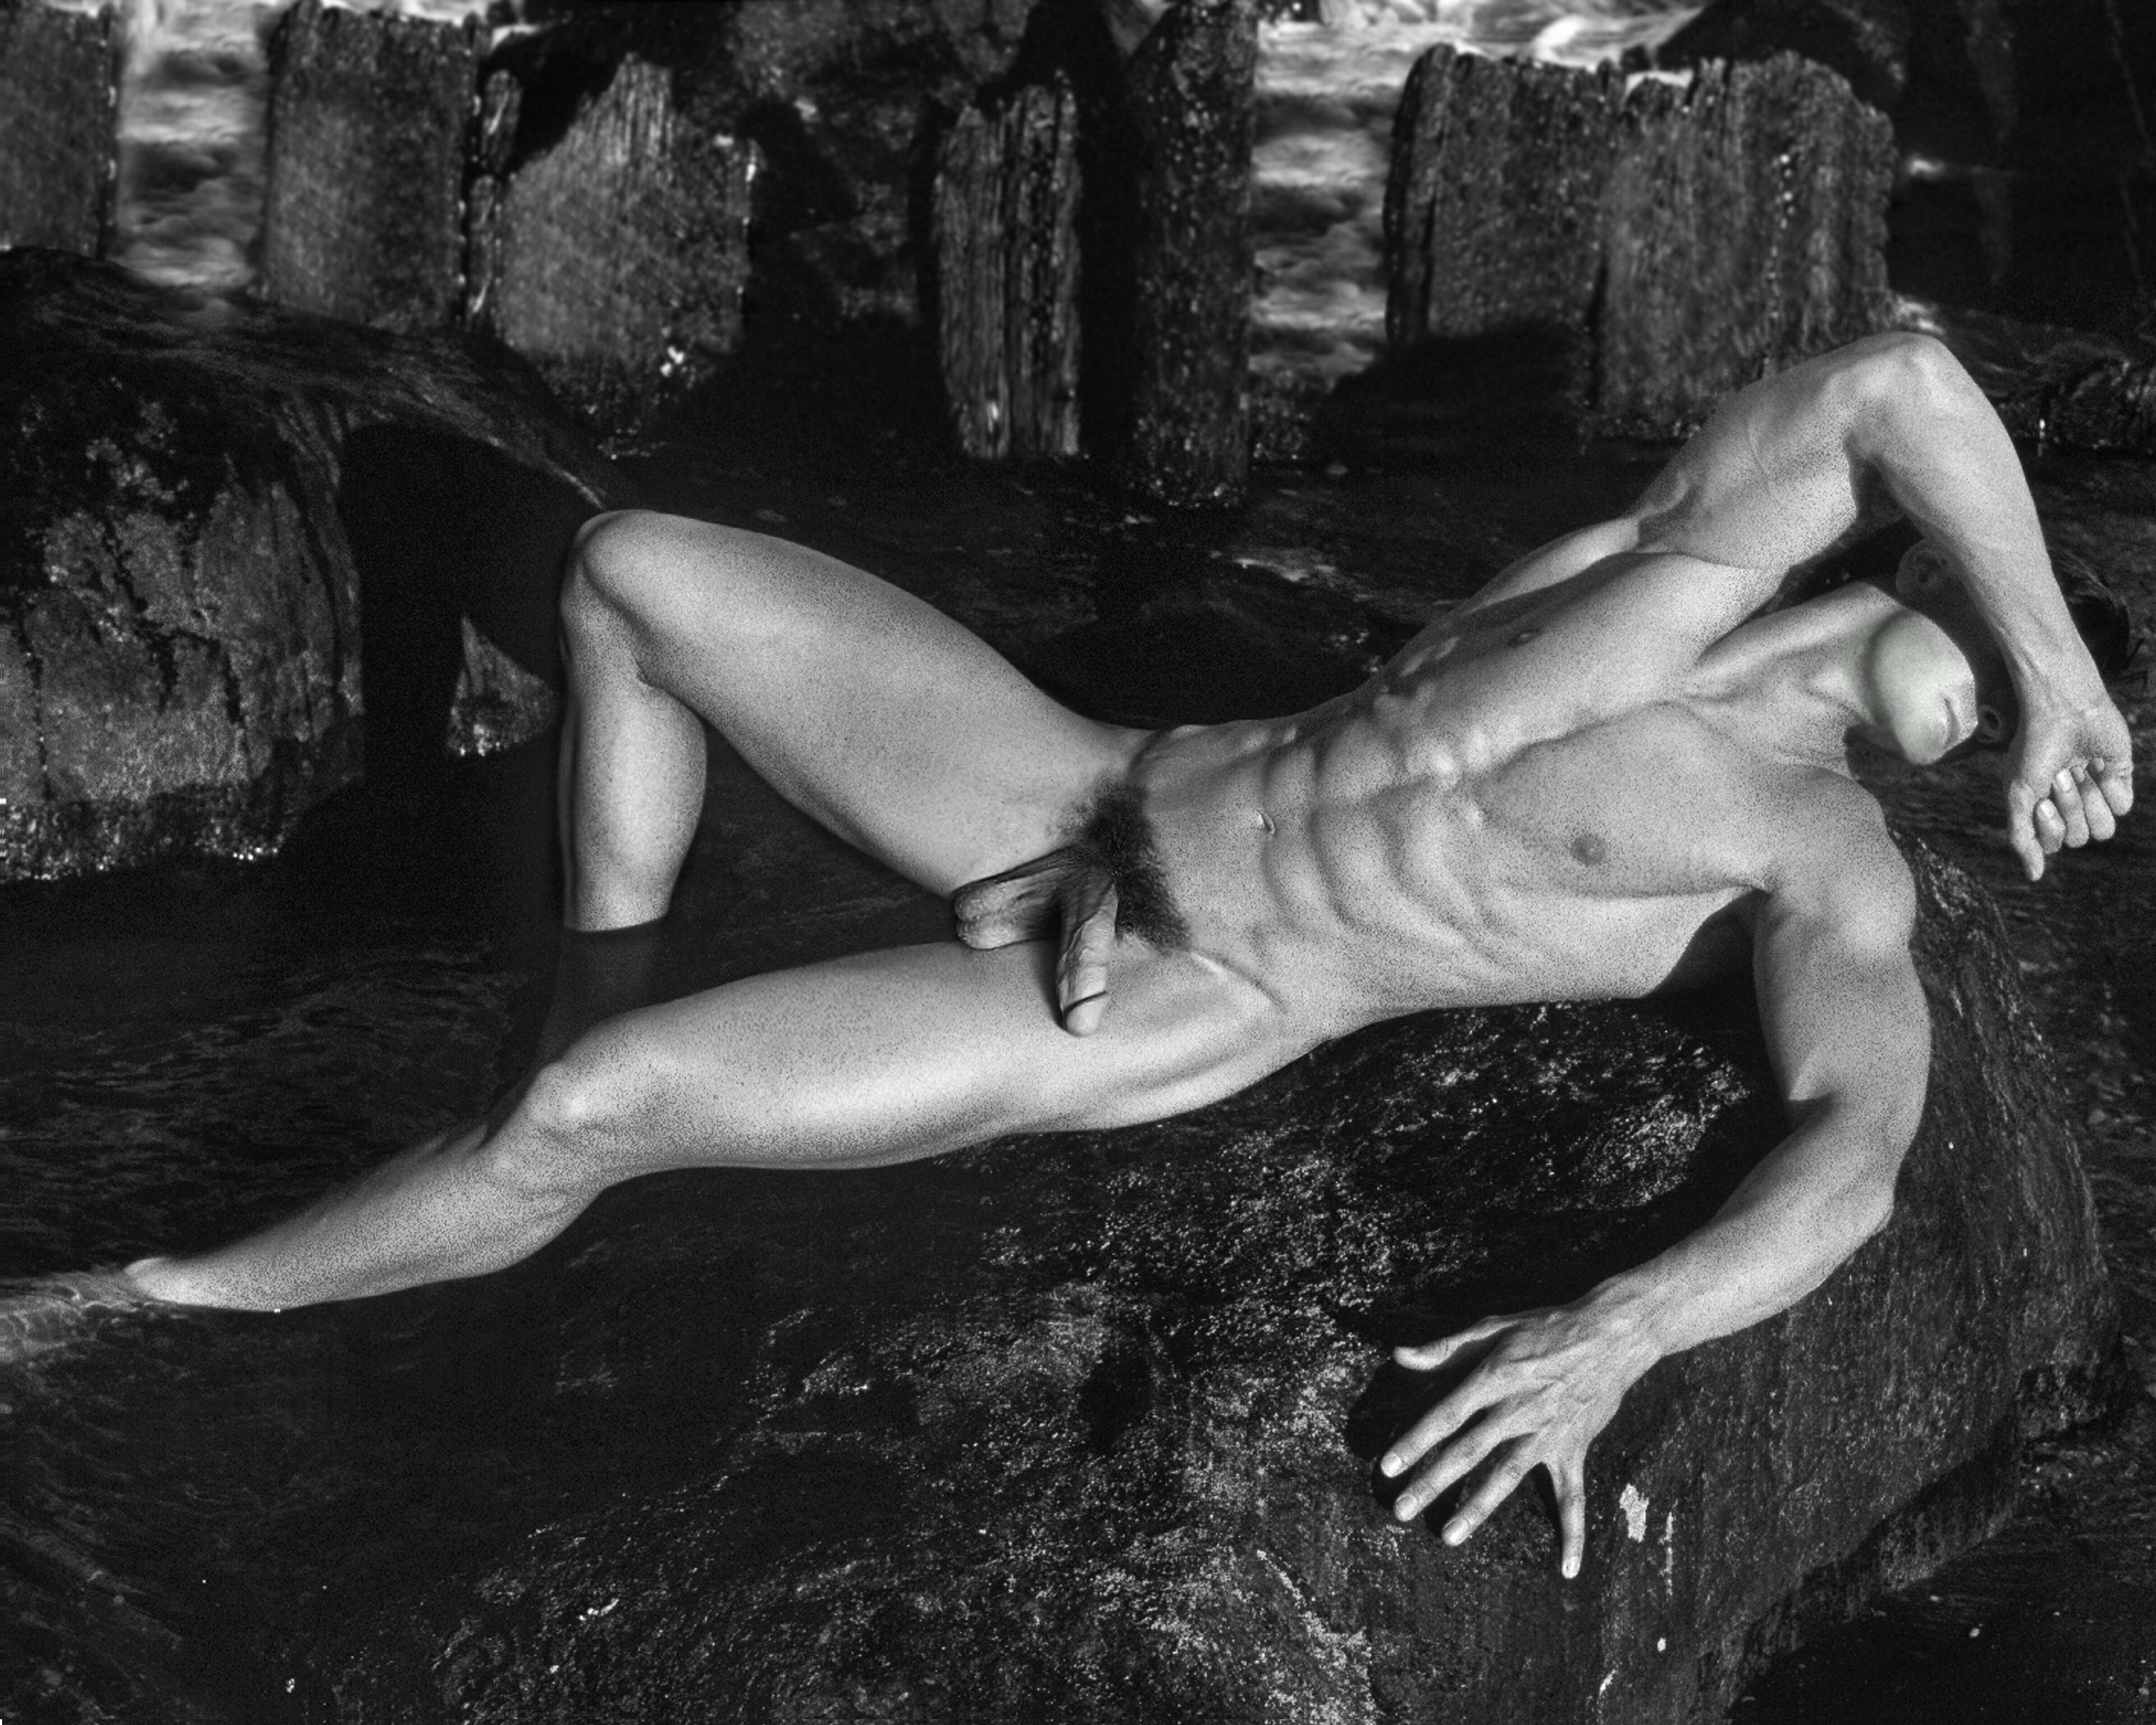 John Falocco, 'On The Rocks', 2015, original Photography Black and White, 20 x 16  inches. Artwork description: 1911  Male Nude Photography ...